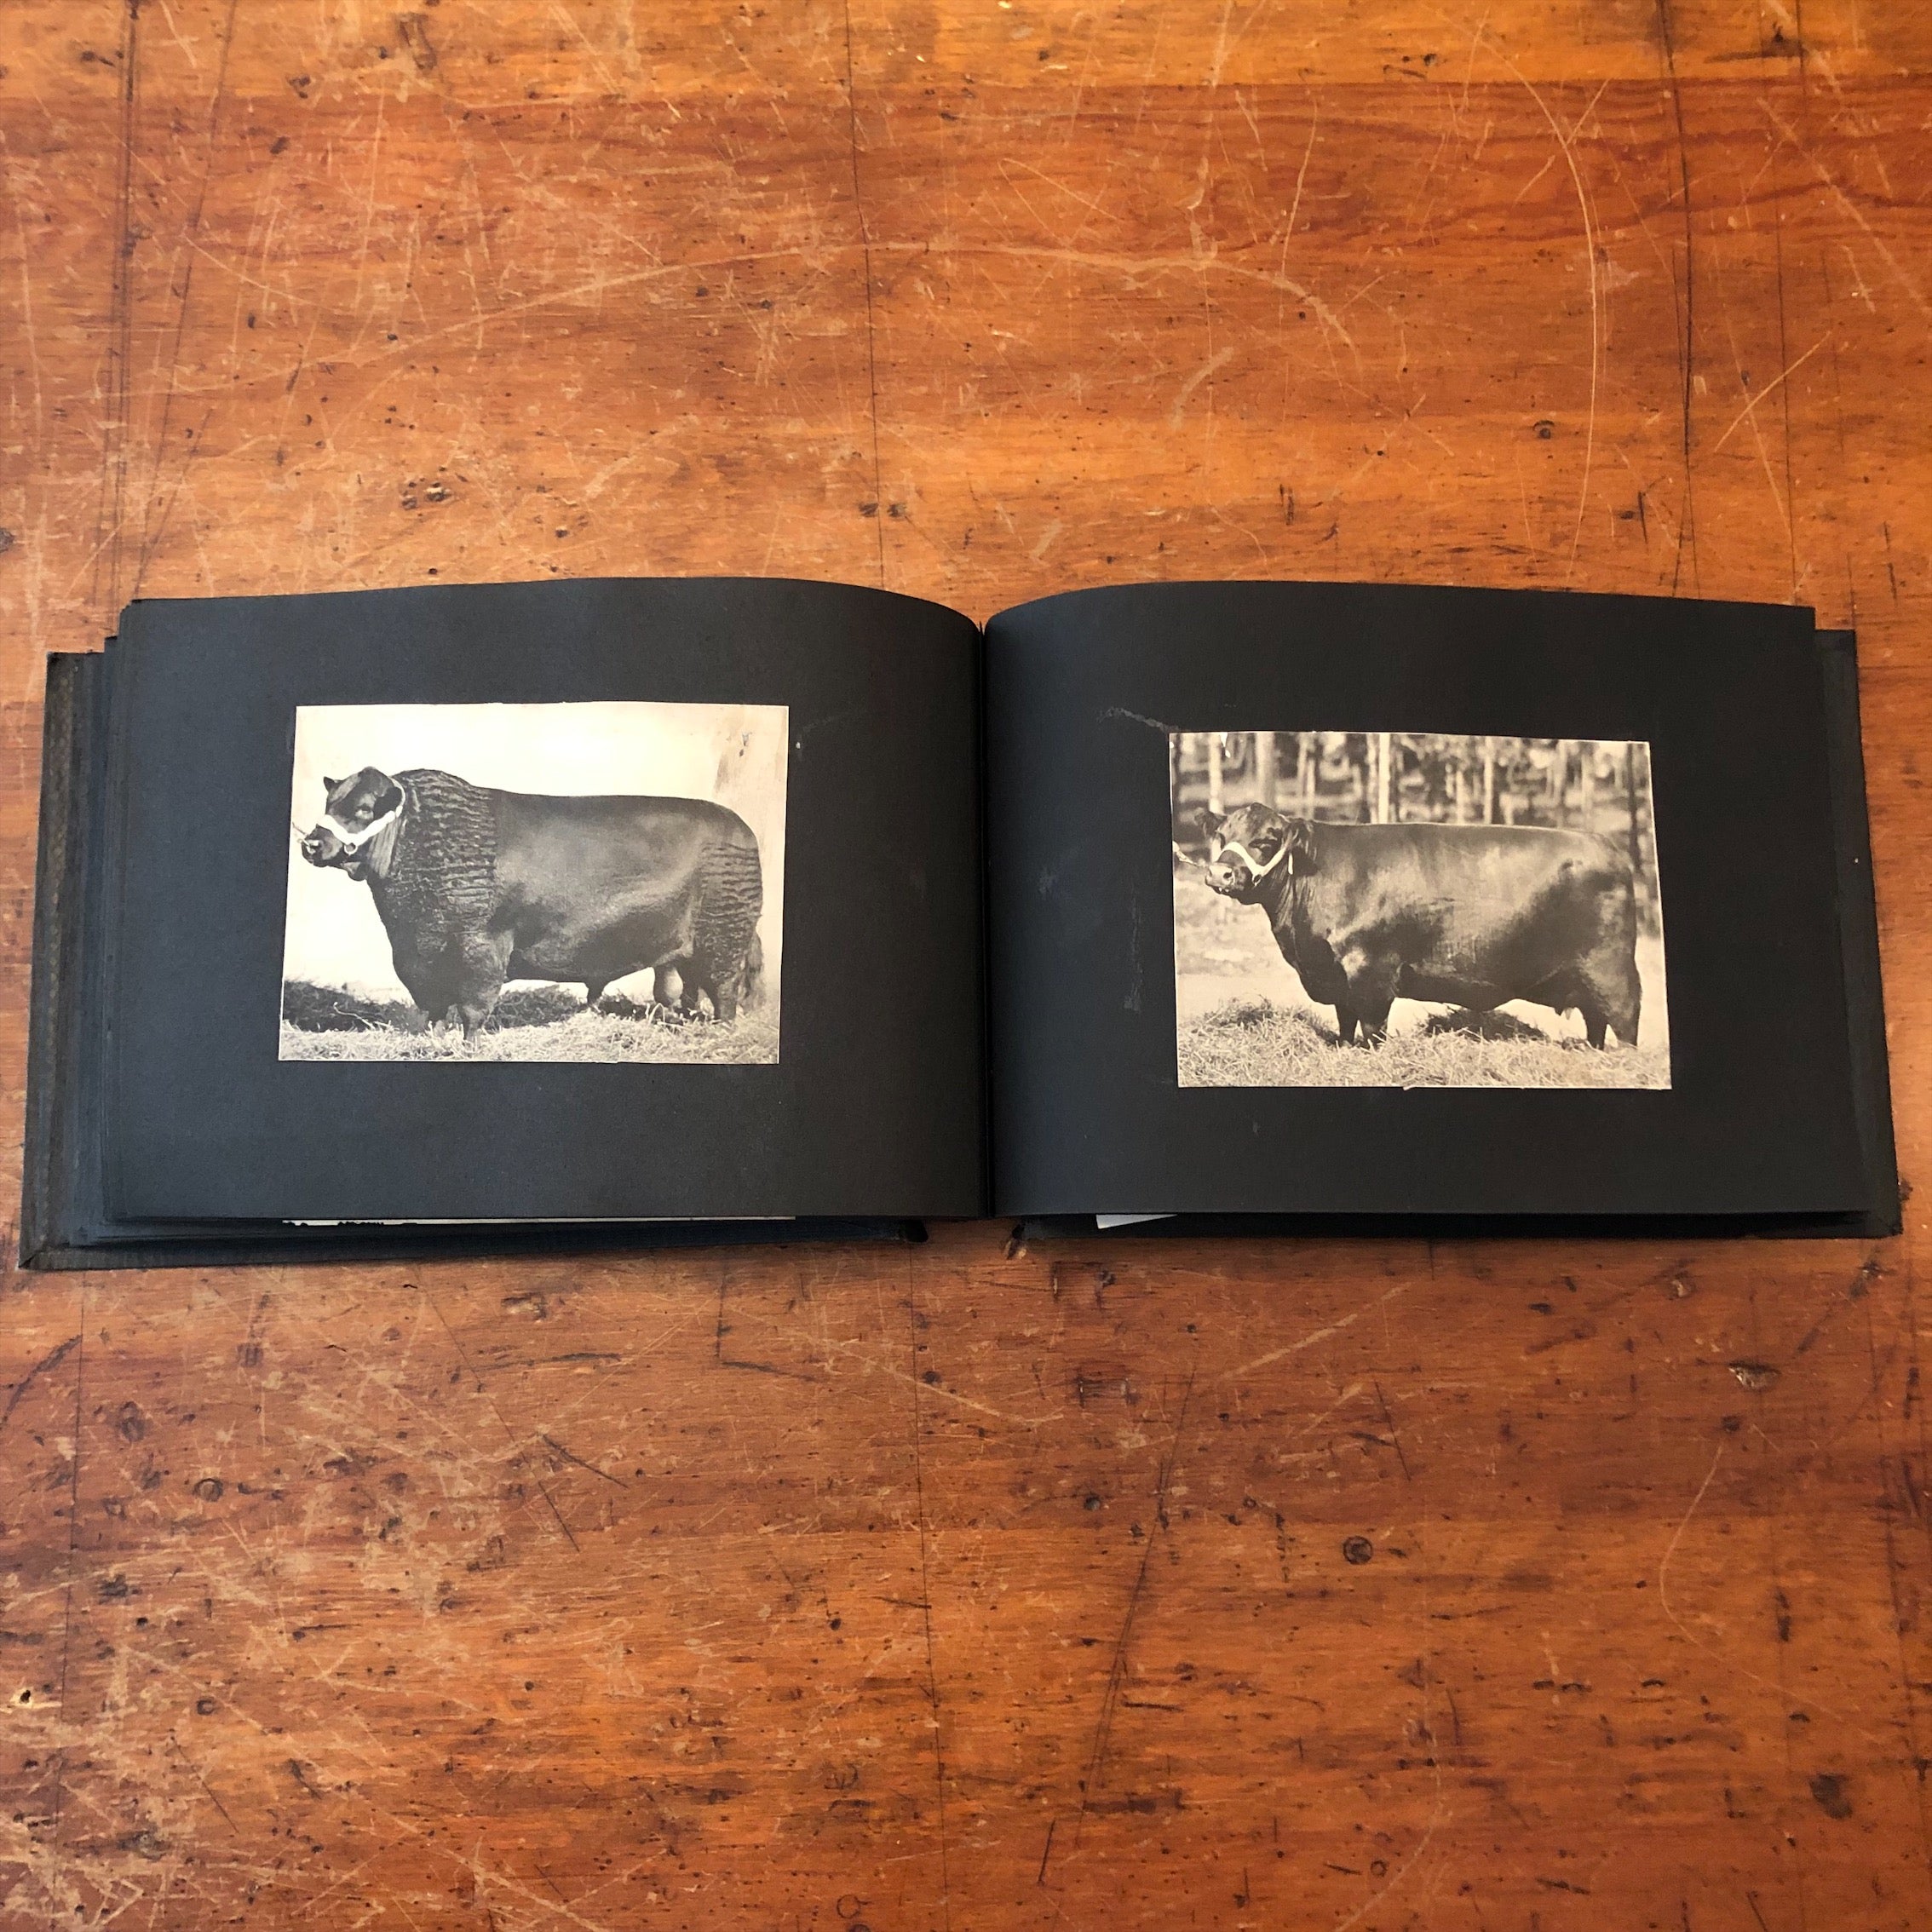 Antique Bovine Photograph Album - Early 1900s - James J. Hill? - Early Cow Photography Prints - Superior Cattle Reference Guide